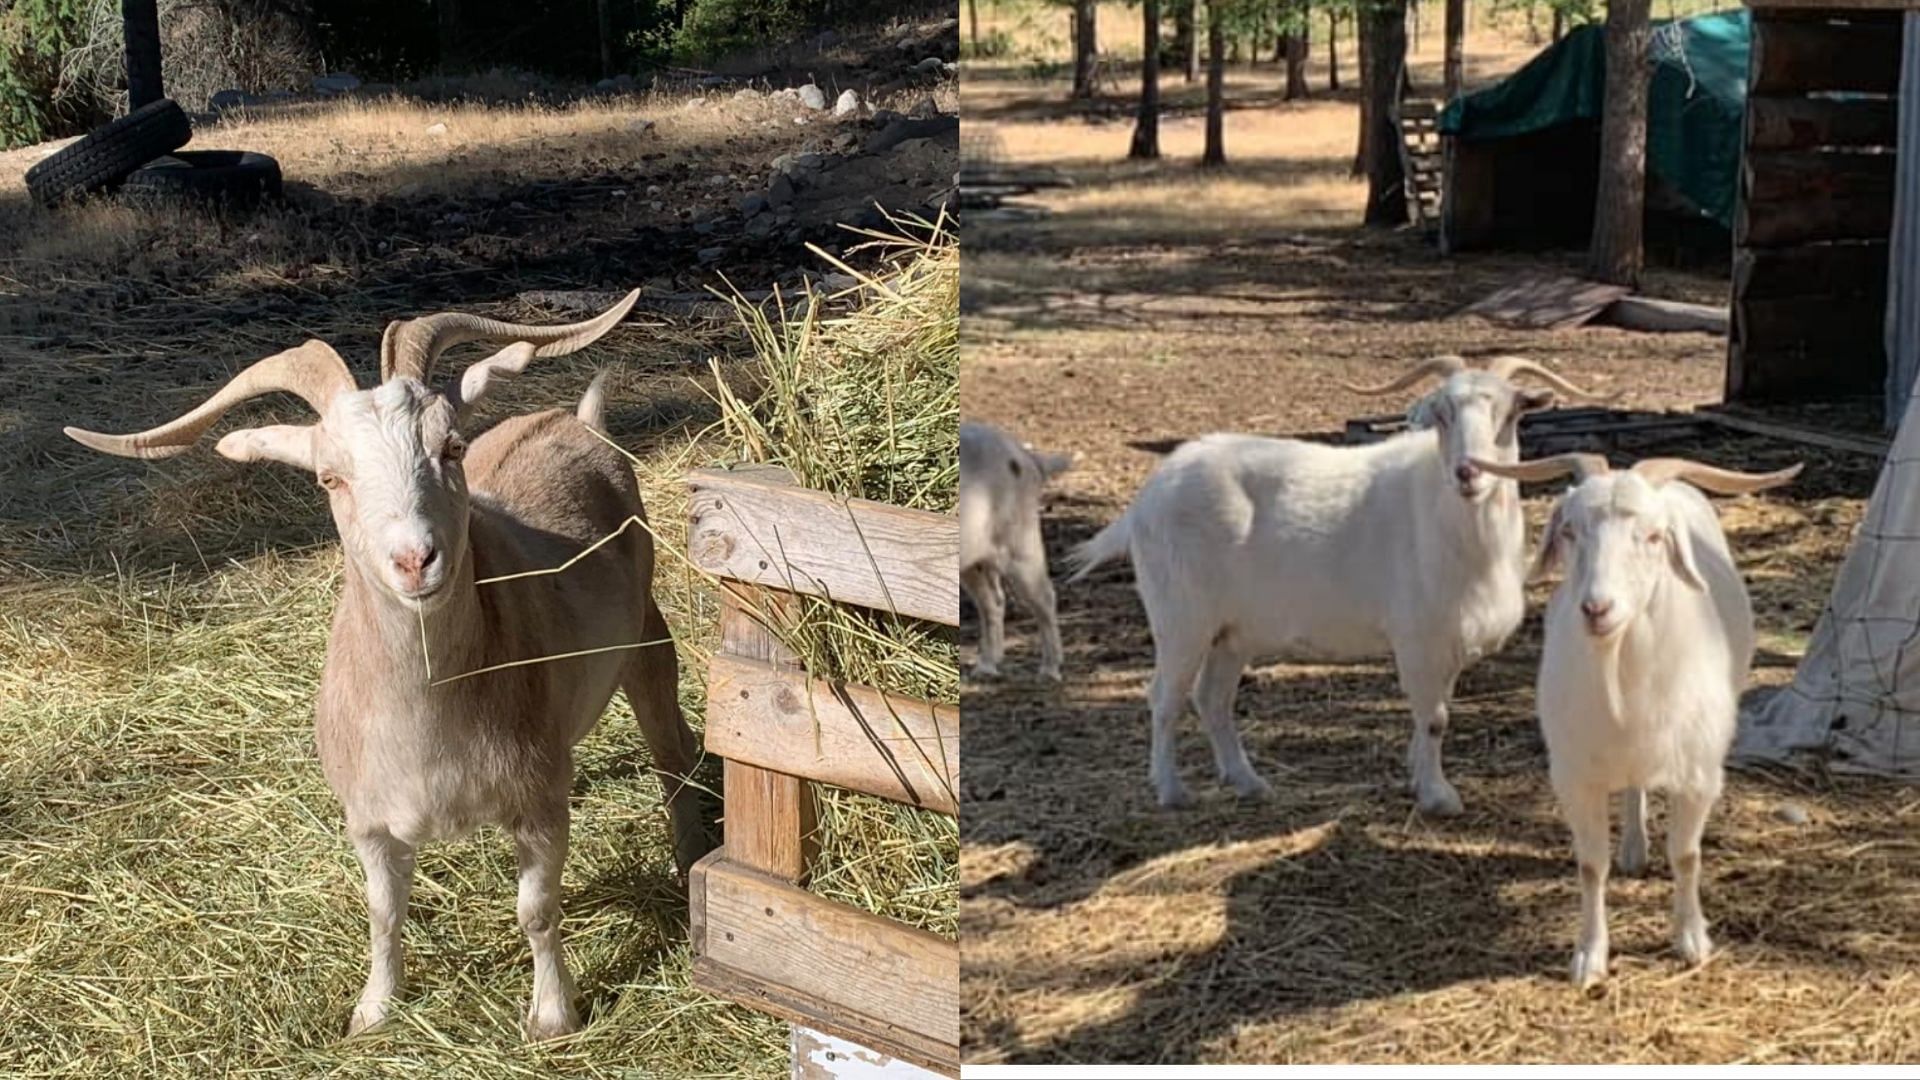 Cashmere is derived from Cashmere goats using the methods of shearing and combing. (Image via Facebook/Critteraid)